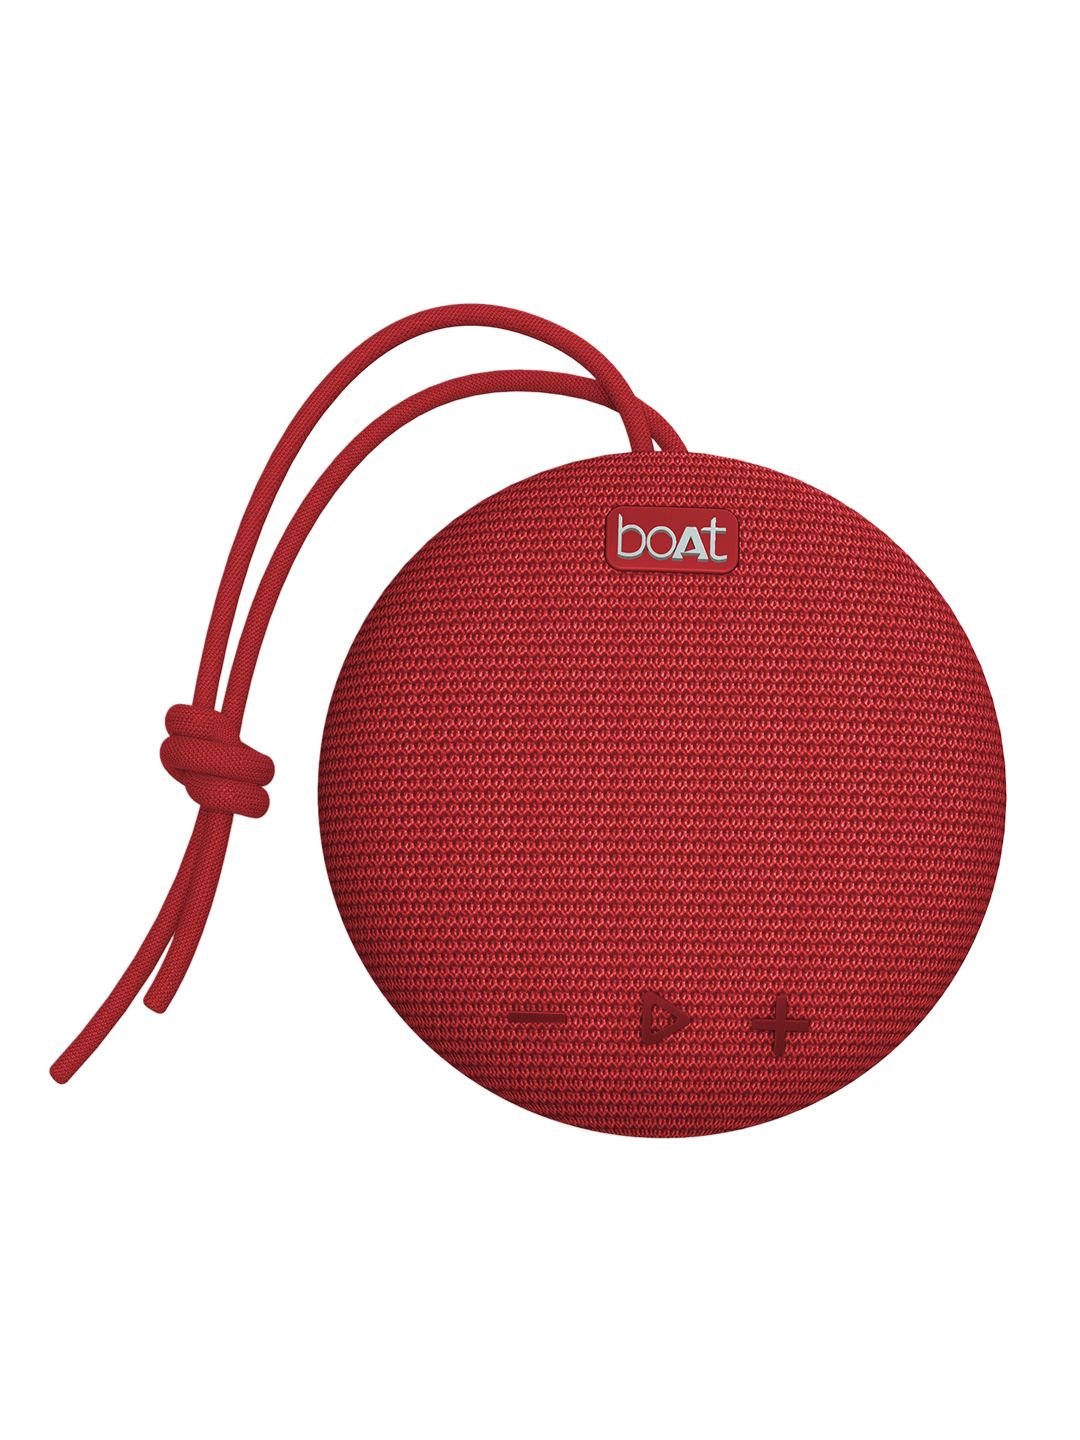 boAt Stone 190 5W Red Portable Wireless Speaker with IPX7 and Bluetooth V5.0 Price in India